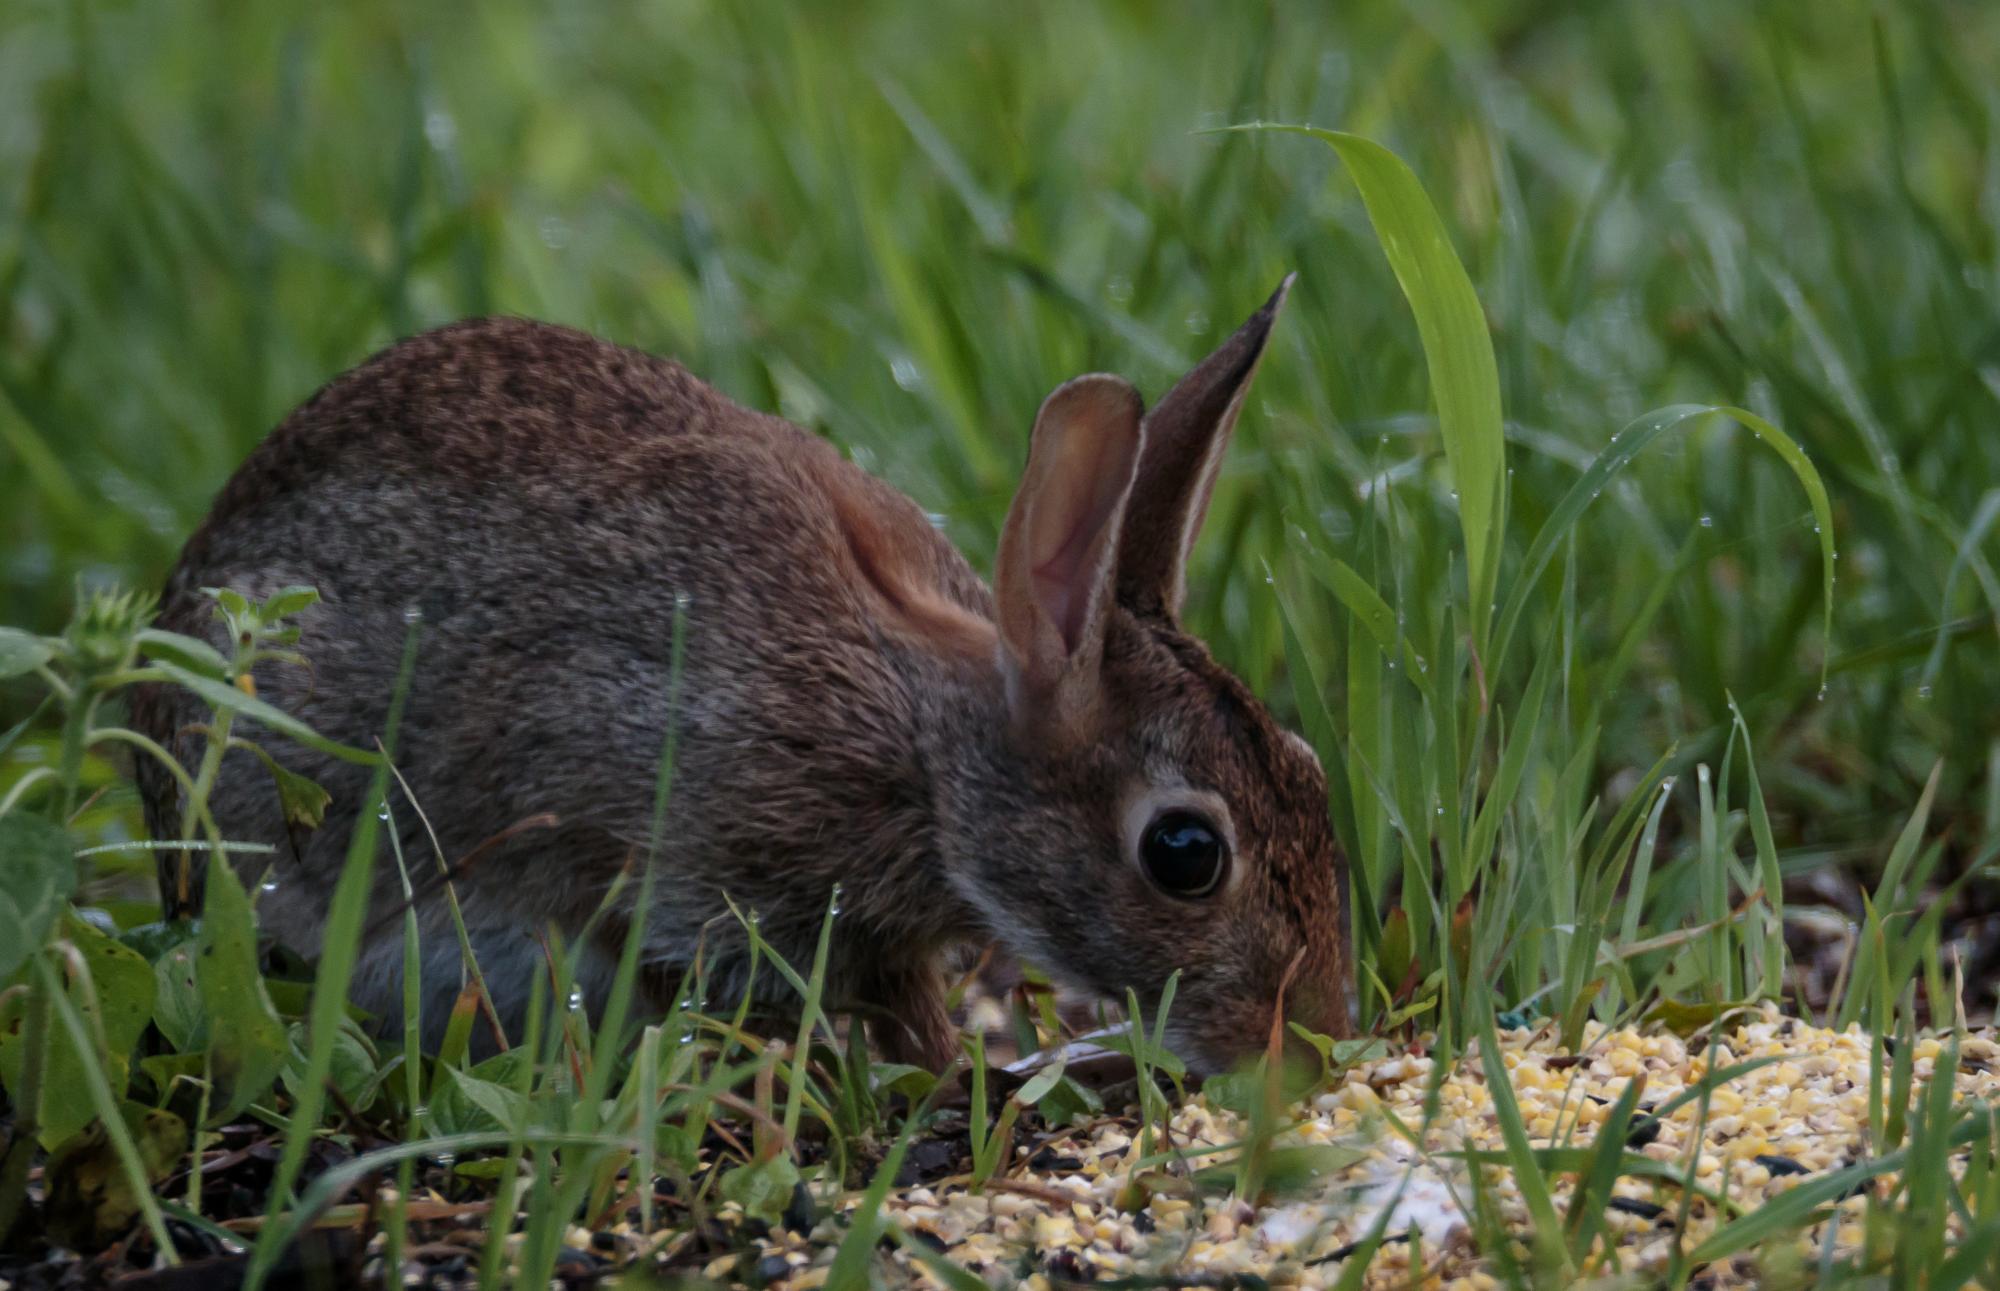 a rabbit eating grain in the grass while sitting down